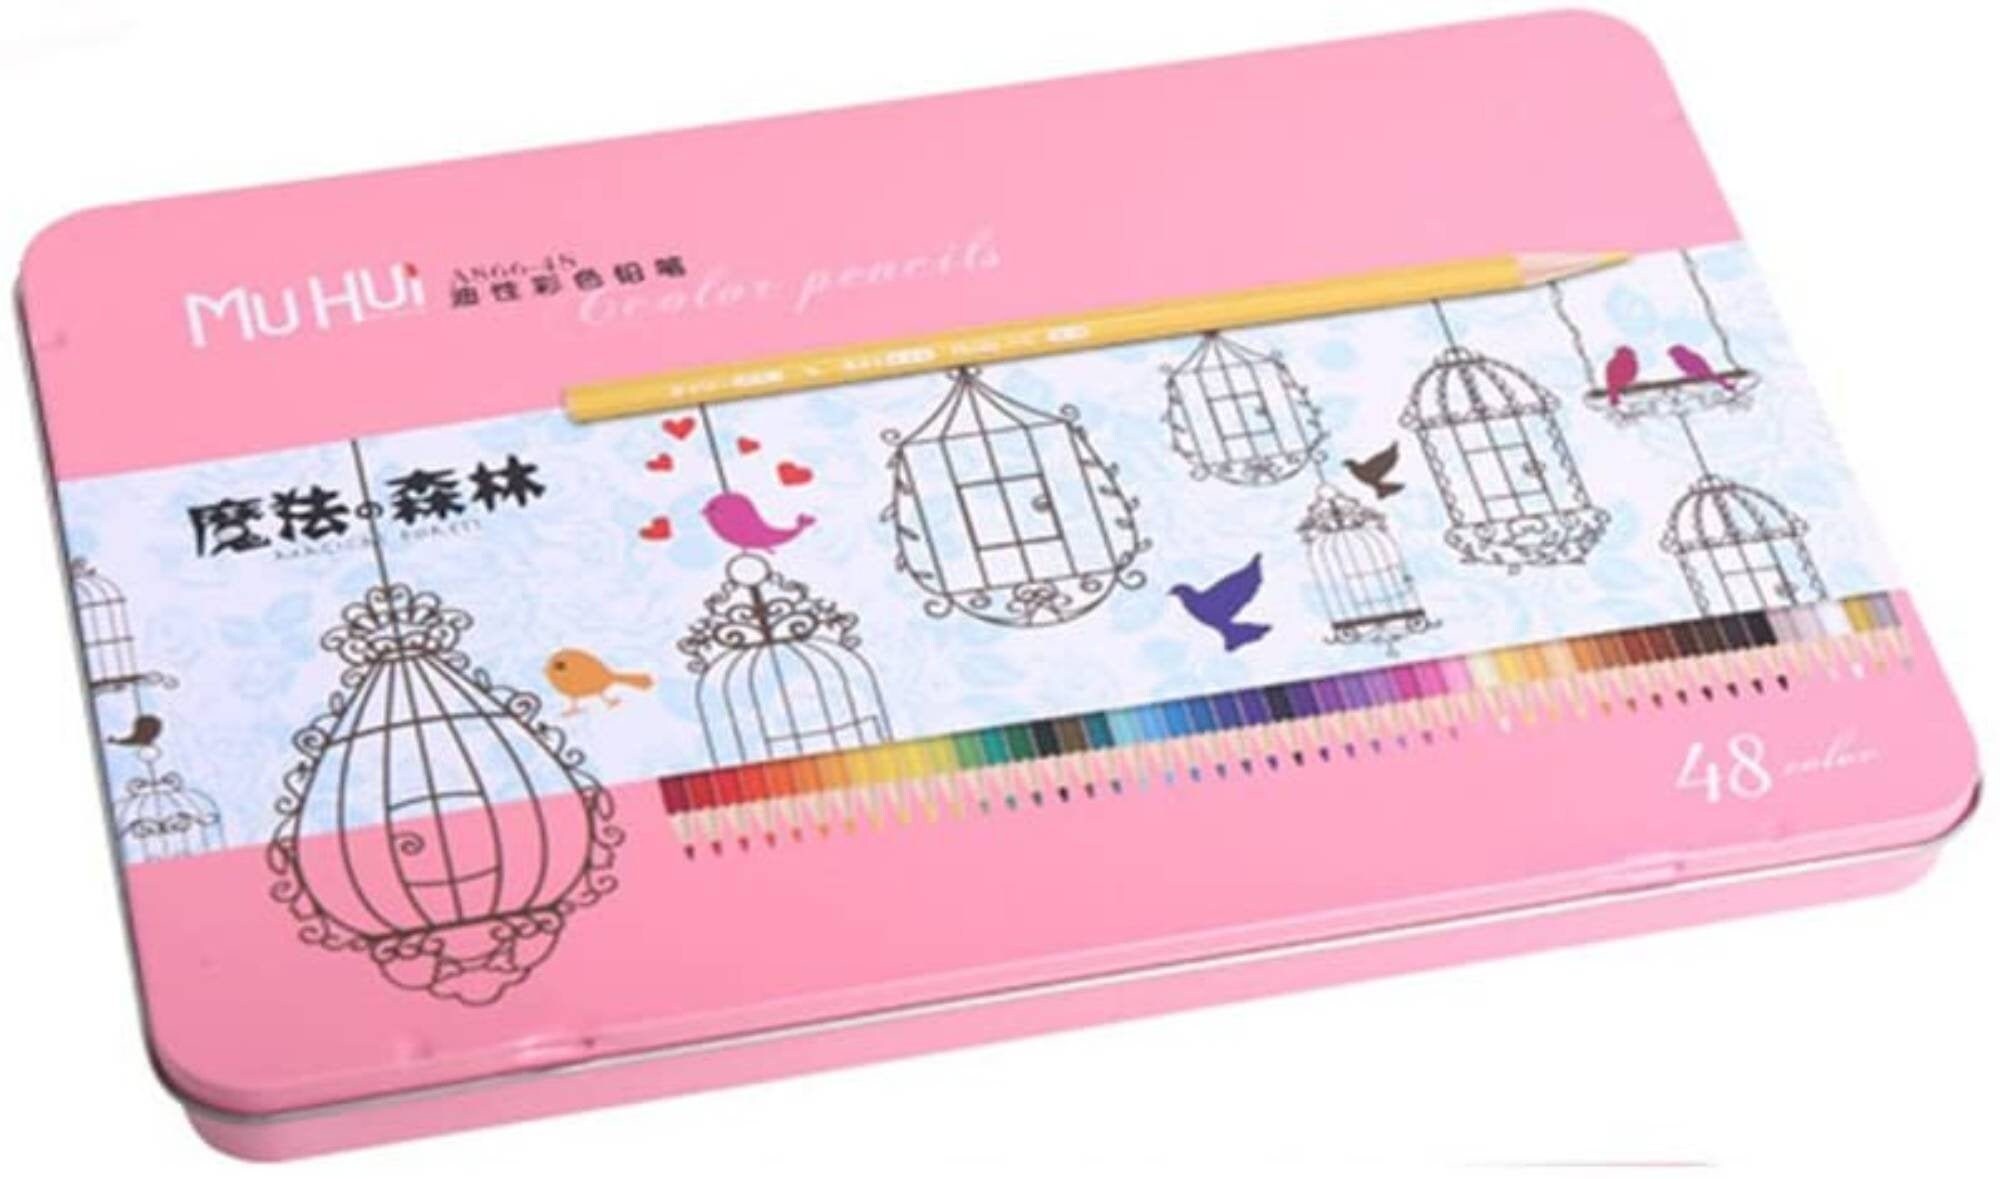 Swatch Form: Holbein Colored Pencils 150pc. 